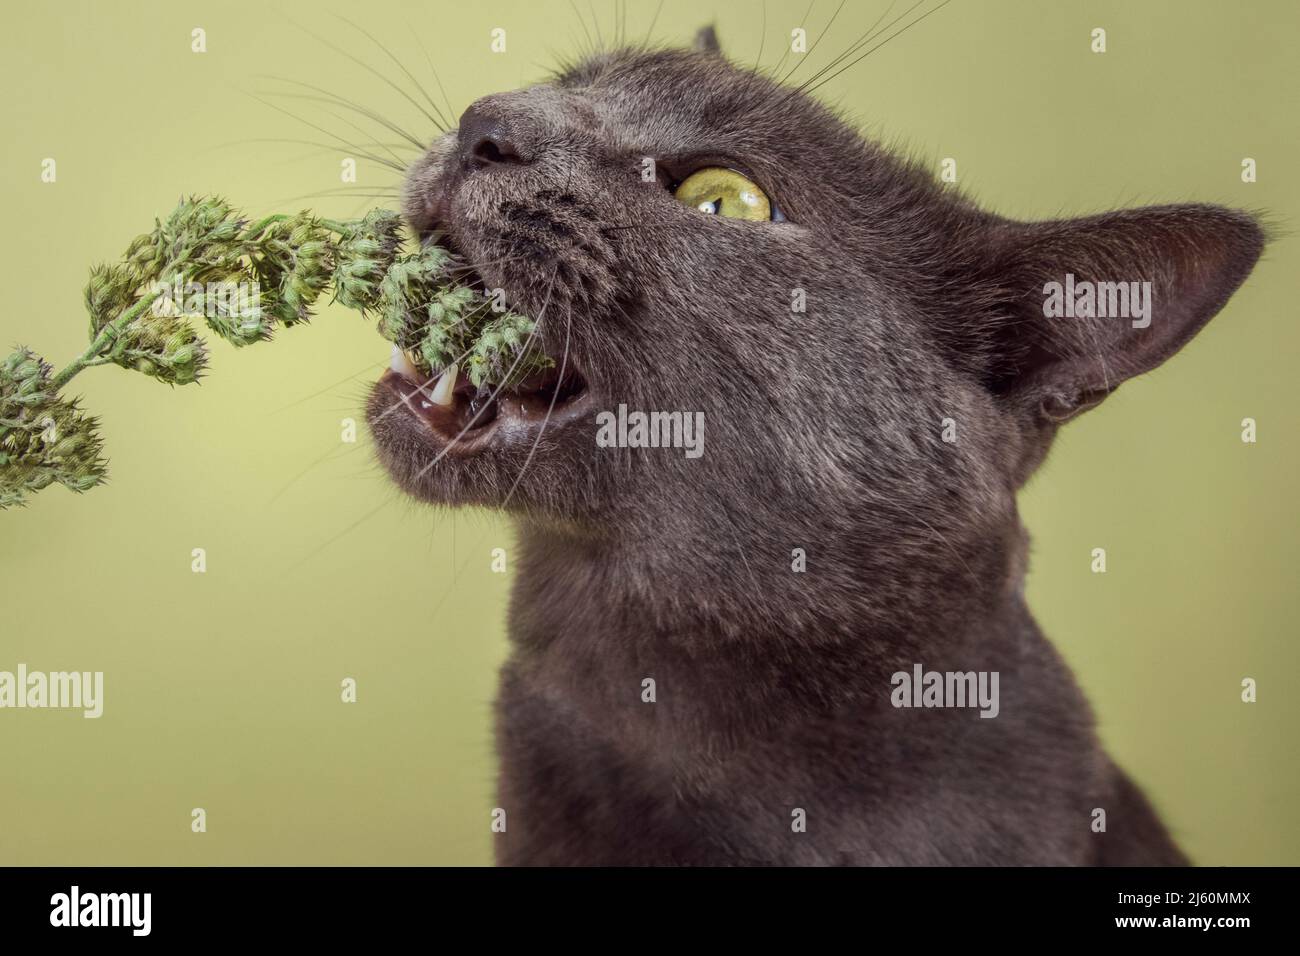 Modern studio portrait of a cat enthusiastically eating a bud of catnip. Stock Photo